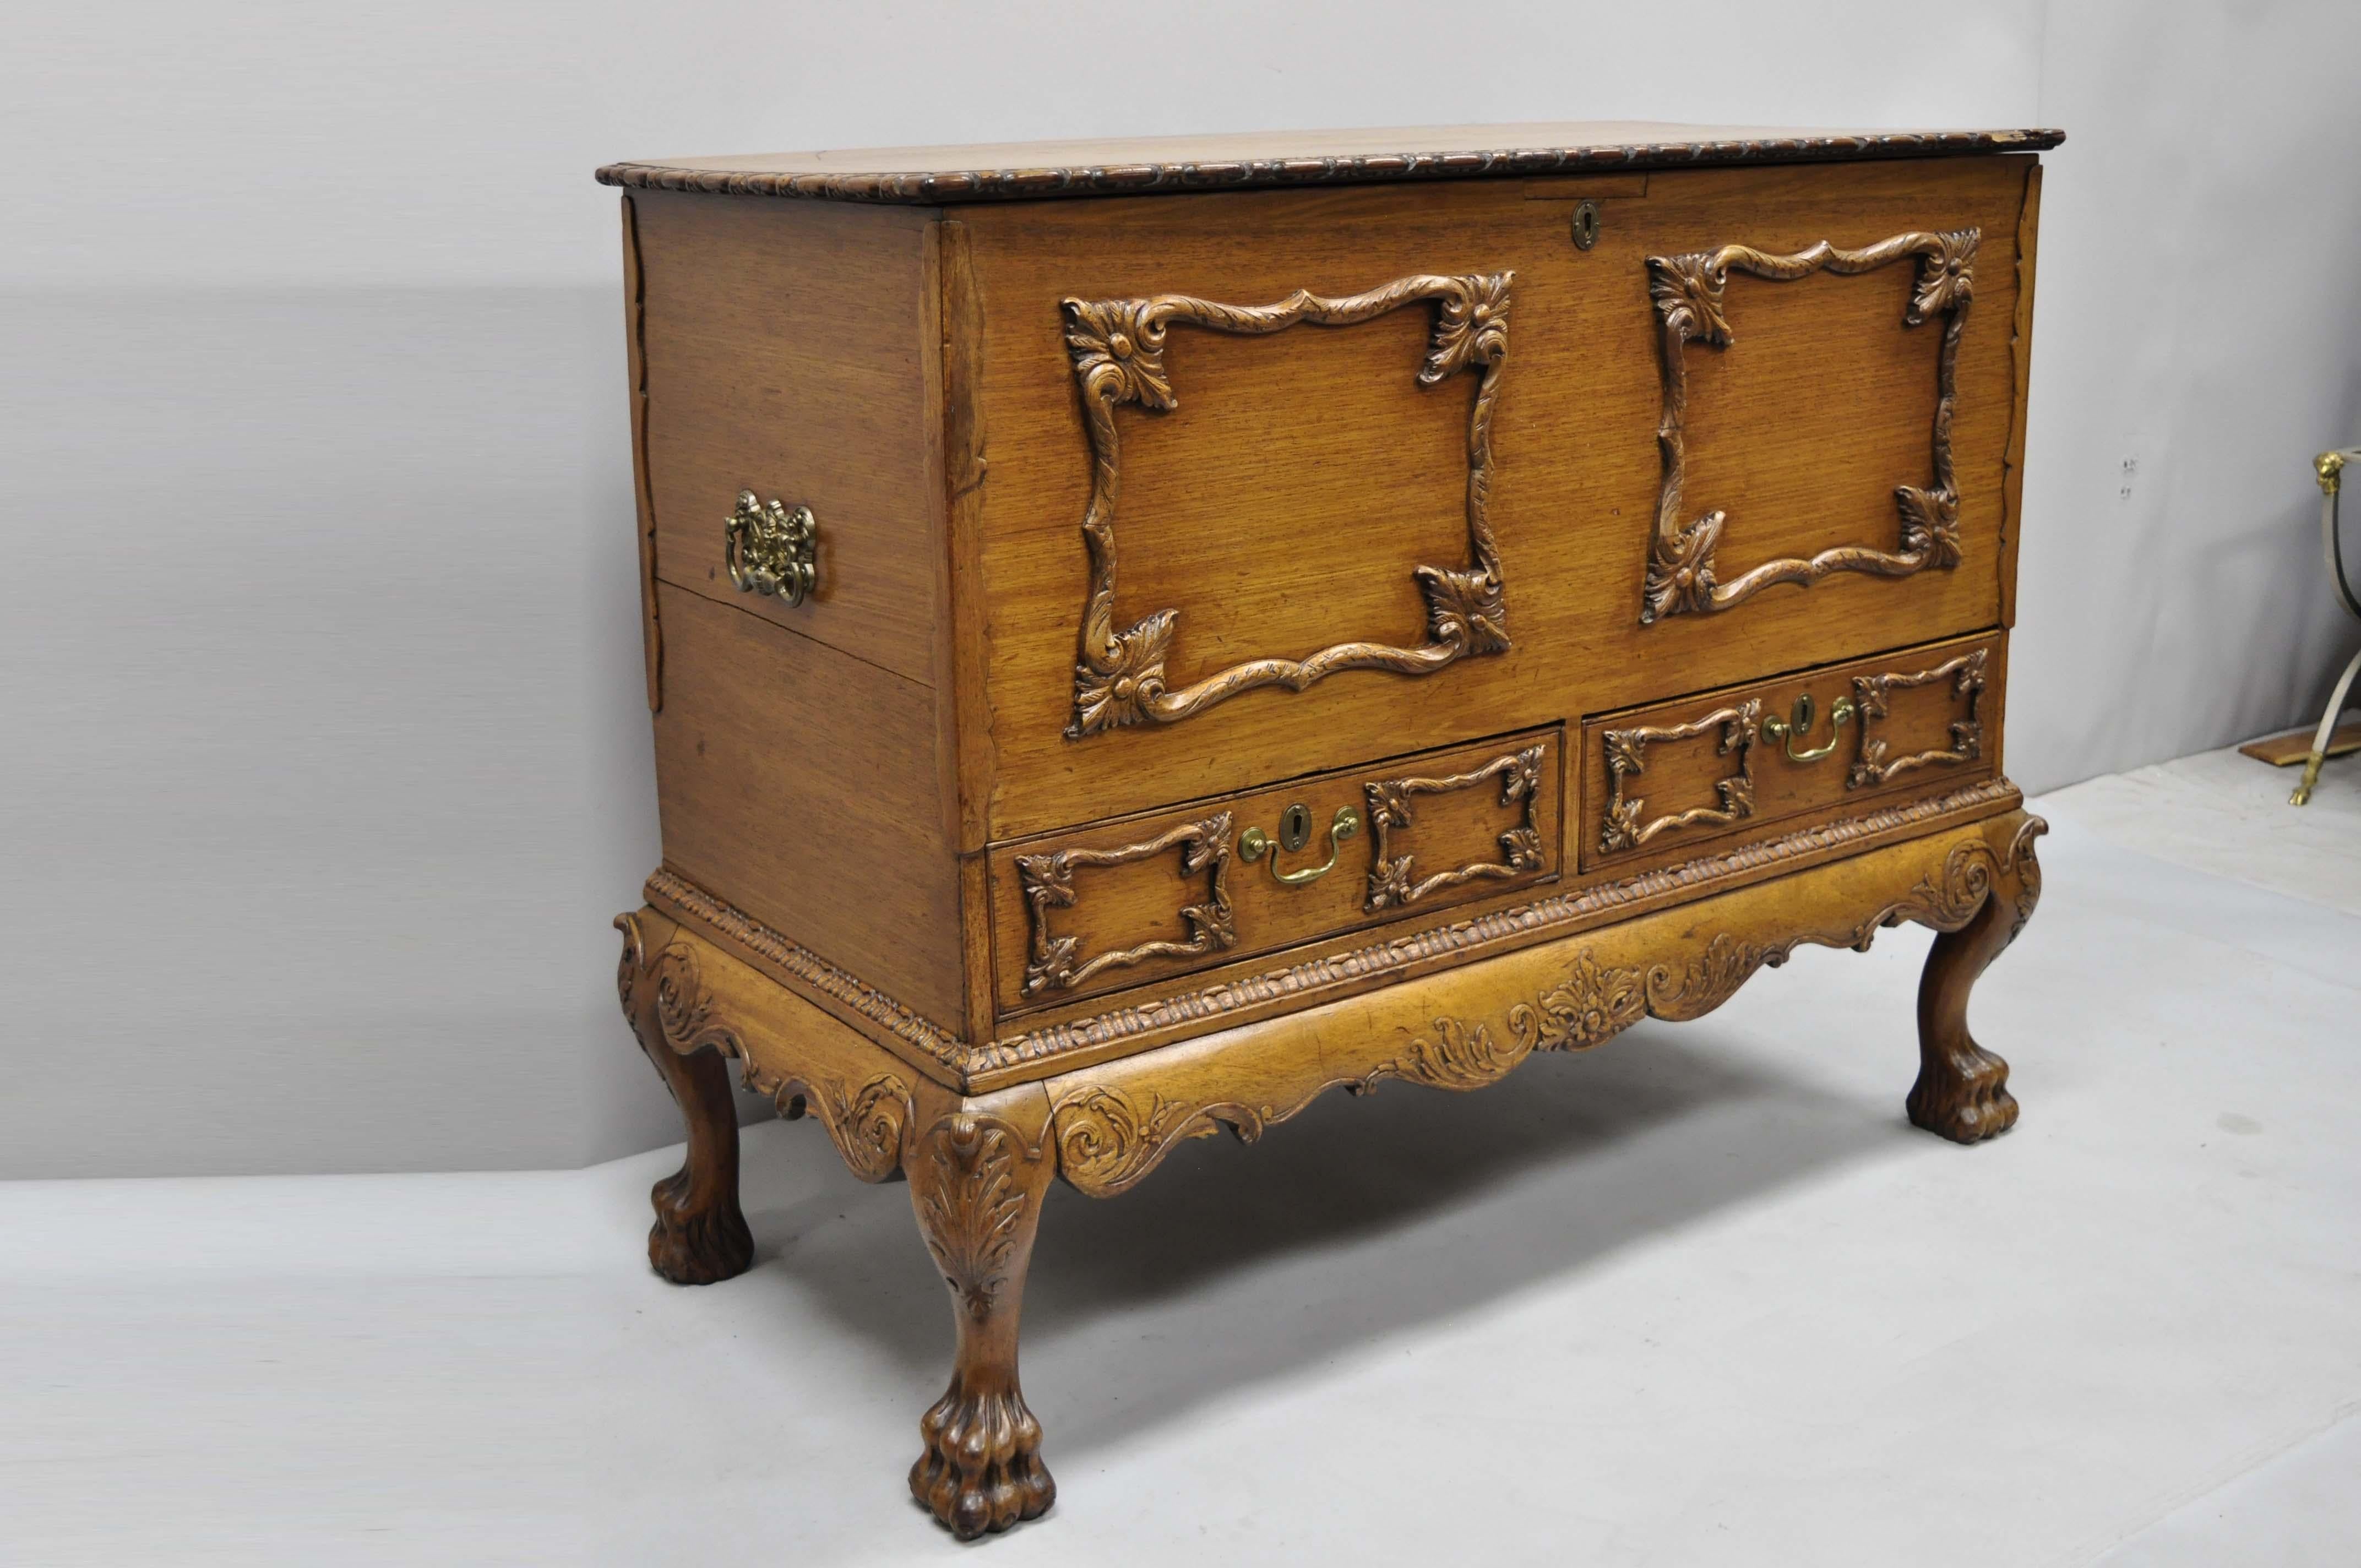 19th century Georgian George II Style mahogany paw foot coffer blanket chest. Item features brass figural handles, solid wood construction, beautiful wood grain, finely carved details, 2 dovetailed drawers, carved paw feet, very nice antique item,